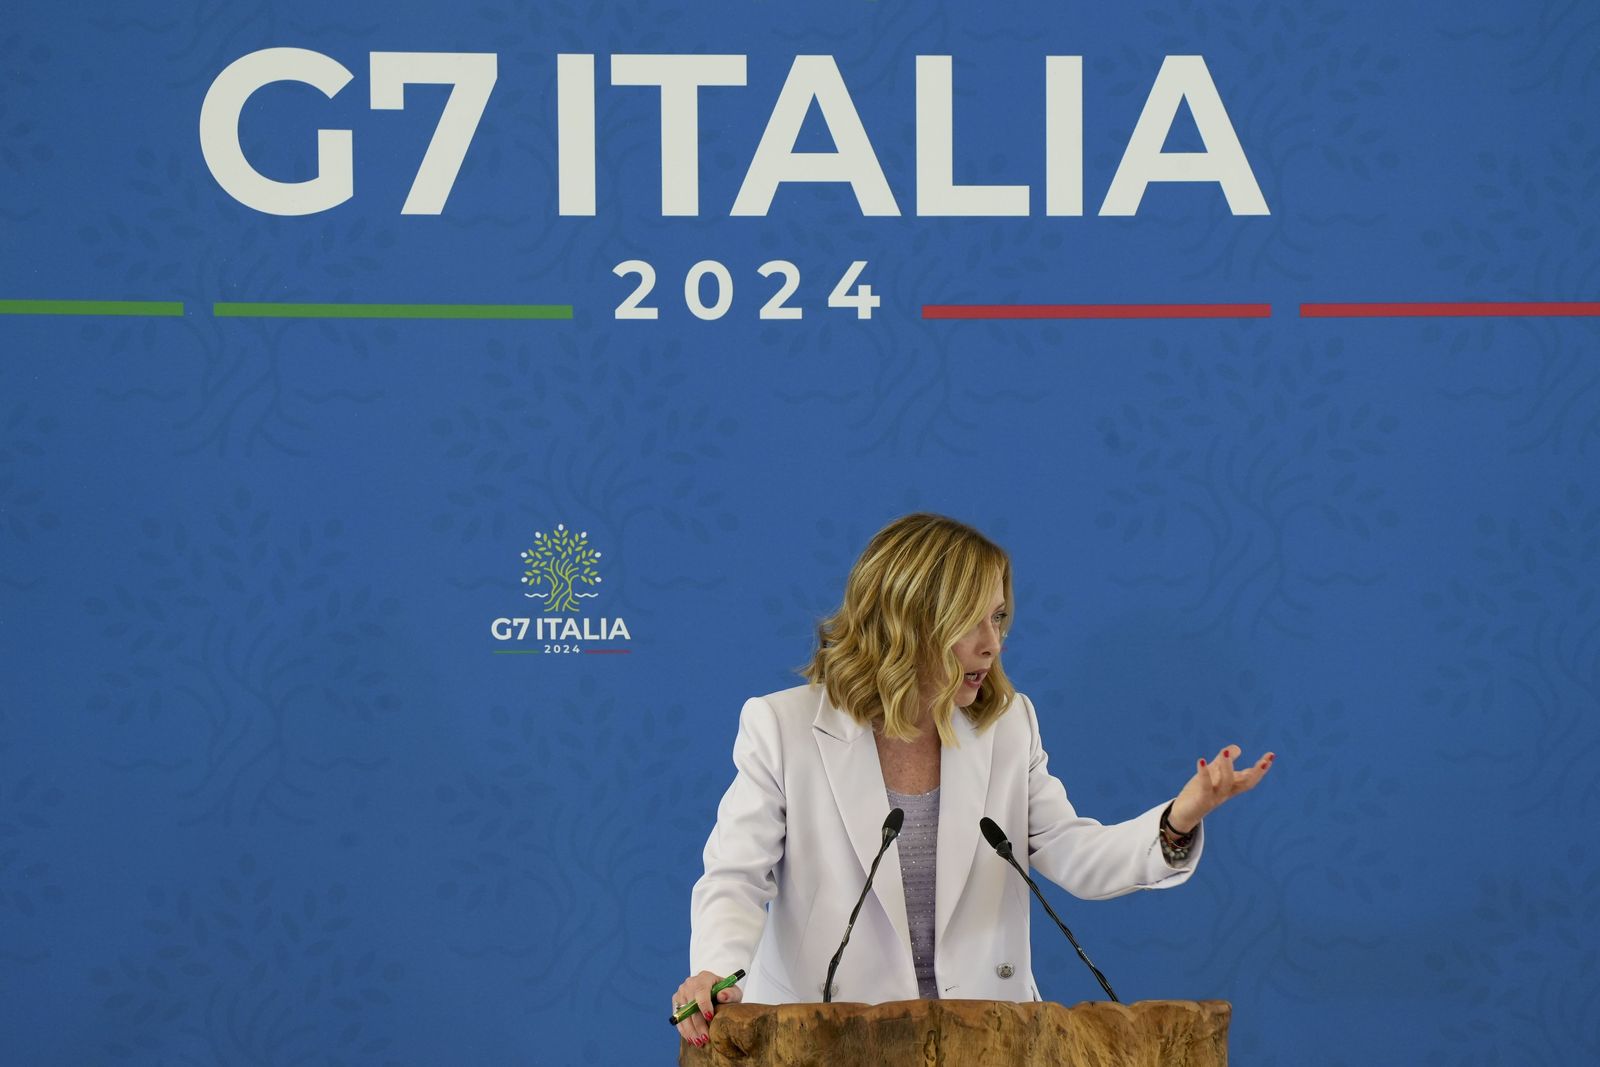 Giorgia Meloni, Italy's prime minister, speaks during a news conference on the final day of the Group of Seven (G-7) leaders summit at the Borgo Egnazia resort in Savelletri, Italy, on Saturday, June 15, 2024. It was�Meloni�s show and she made sure everyone knew it. As the politically wounded went home, the Italian prime minister making her debut as a Group of Seven host looked more at ease with the leaders of the Global South. Photographer: Francesca Volpi/Bloomberg